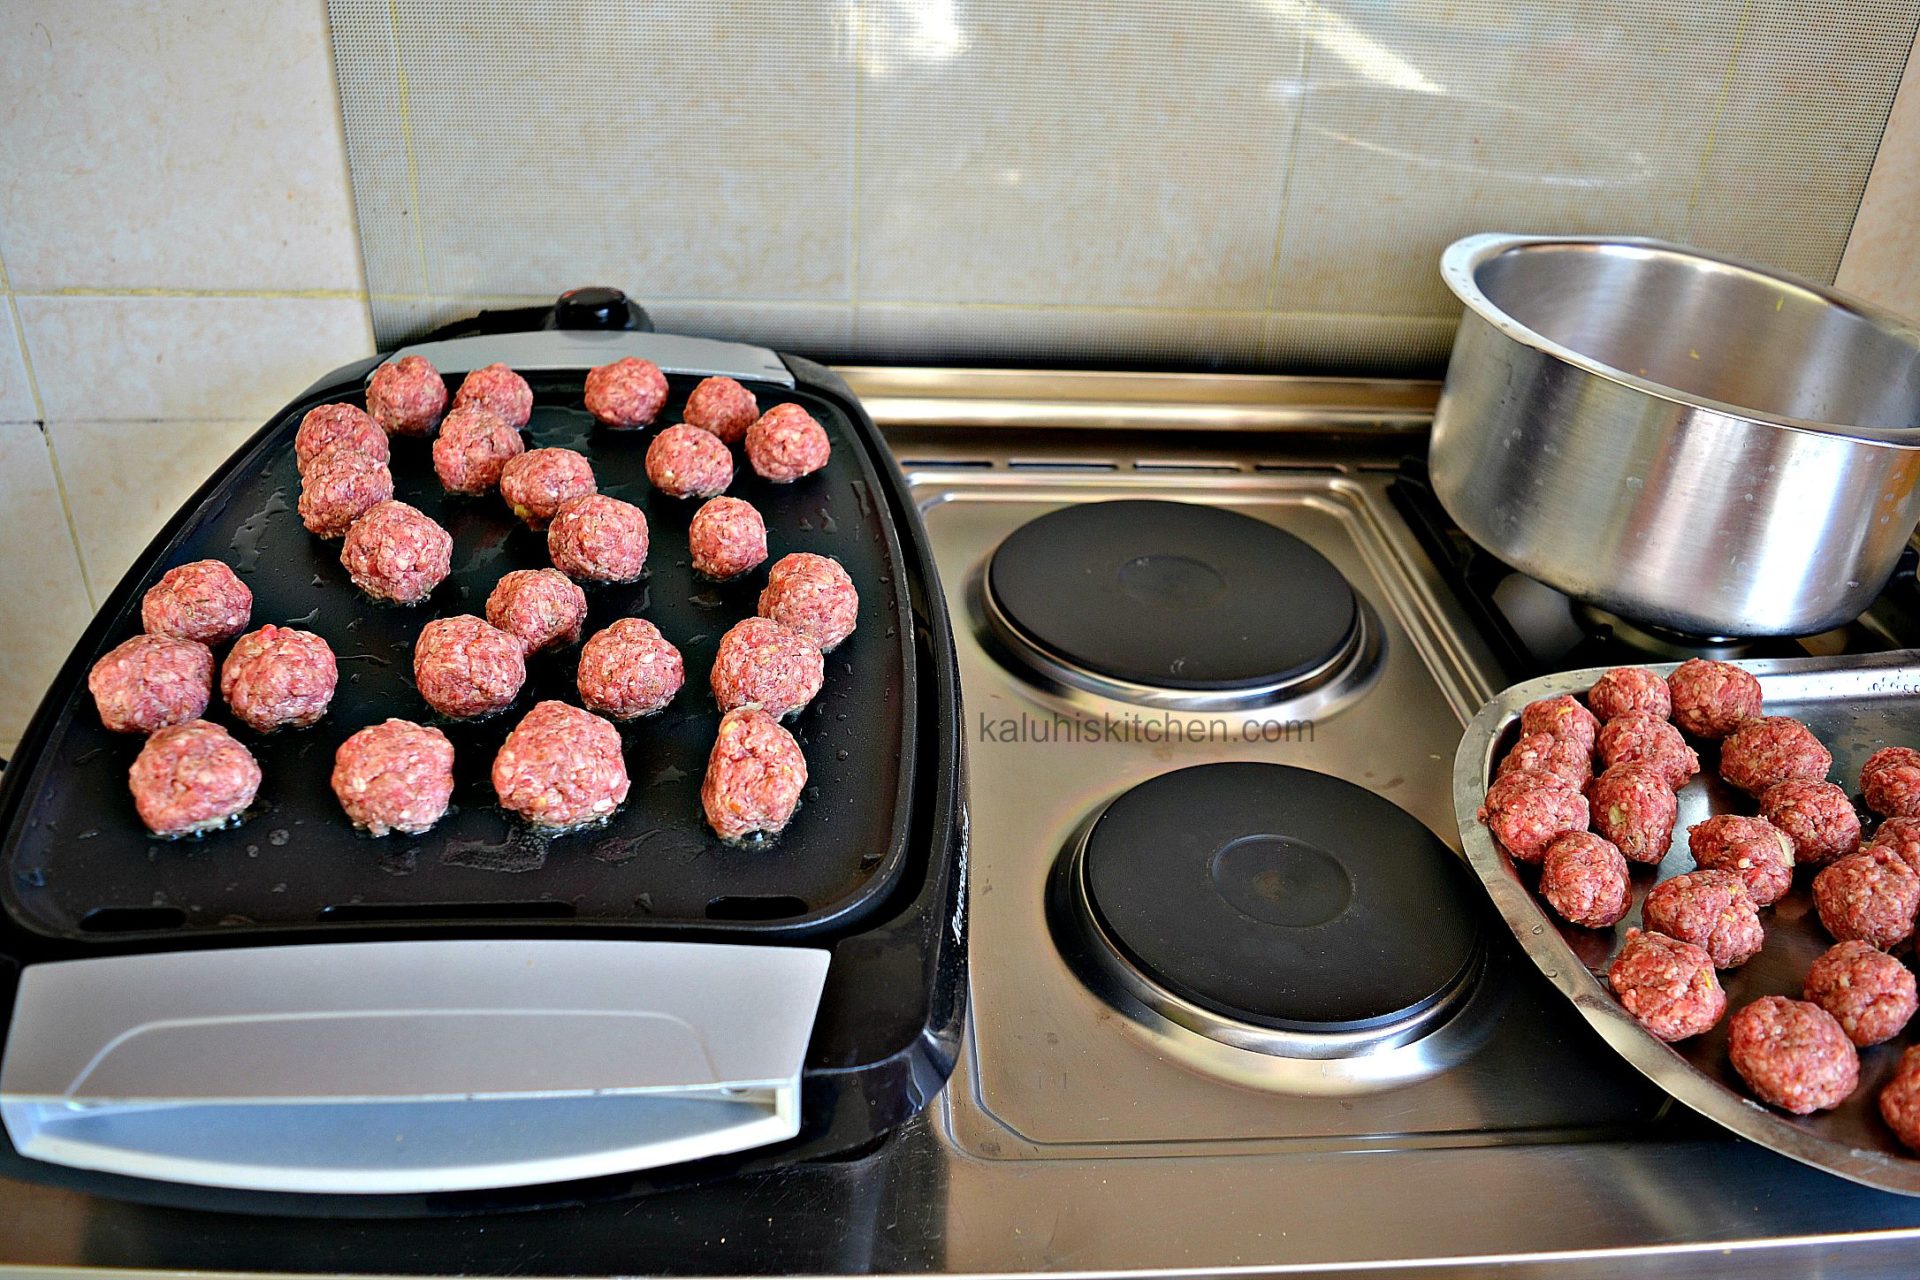 lightly fry the meatbals to get them cooked through befor adding them to the sauce_use a grill or a pan_kaluhiskitchen.com